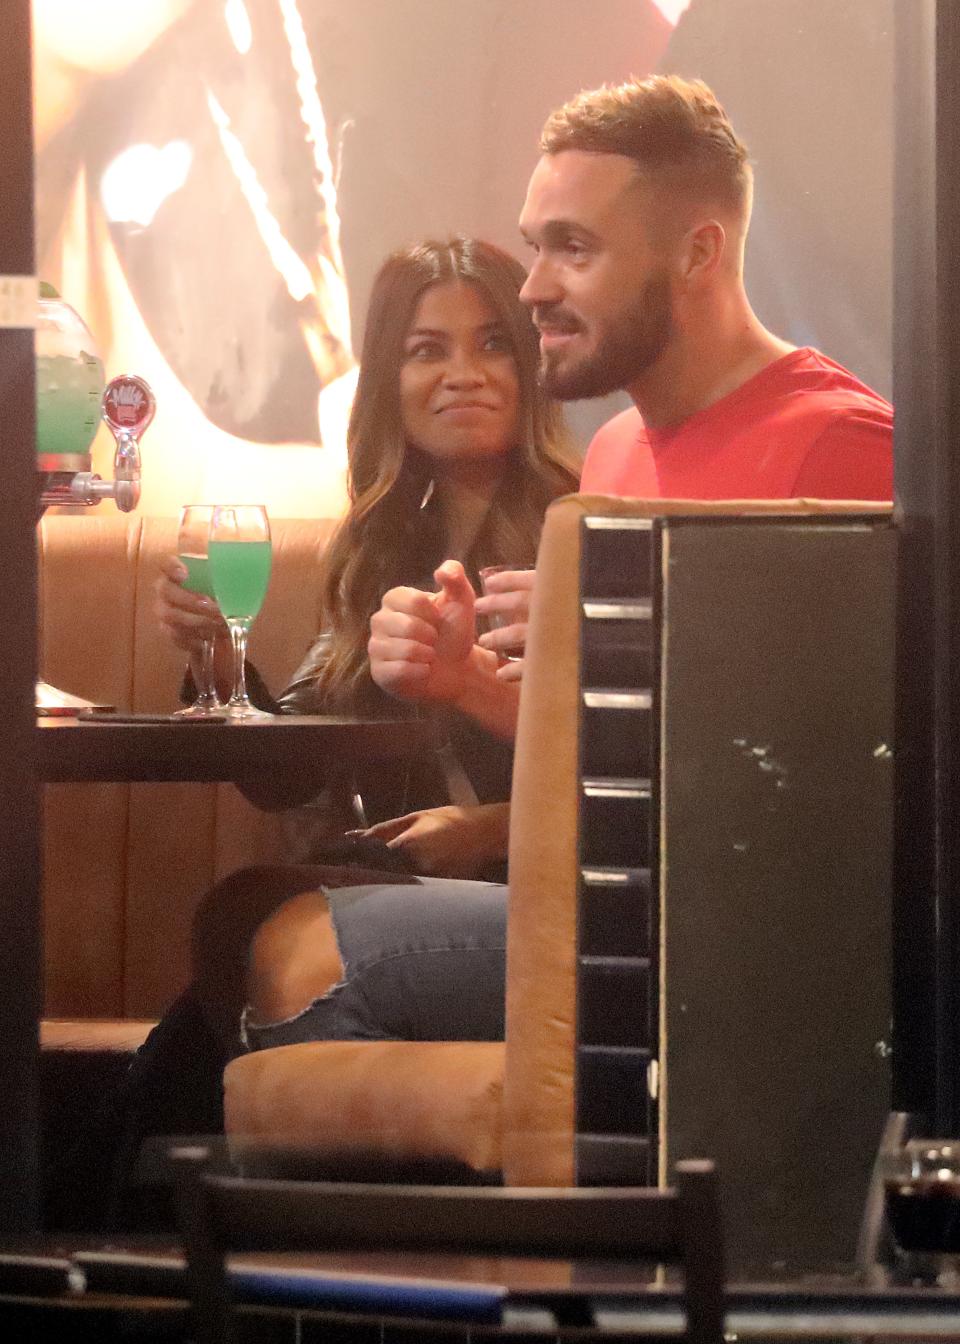 While the new romance appears to be driven by spice and spontaneity, Cyrell’s is said to have “had an attraction to Eden ever since she saw him on Love Island last year”. Photo: Diimex